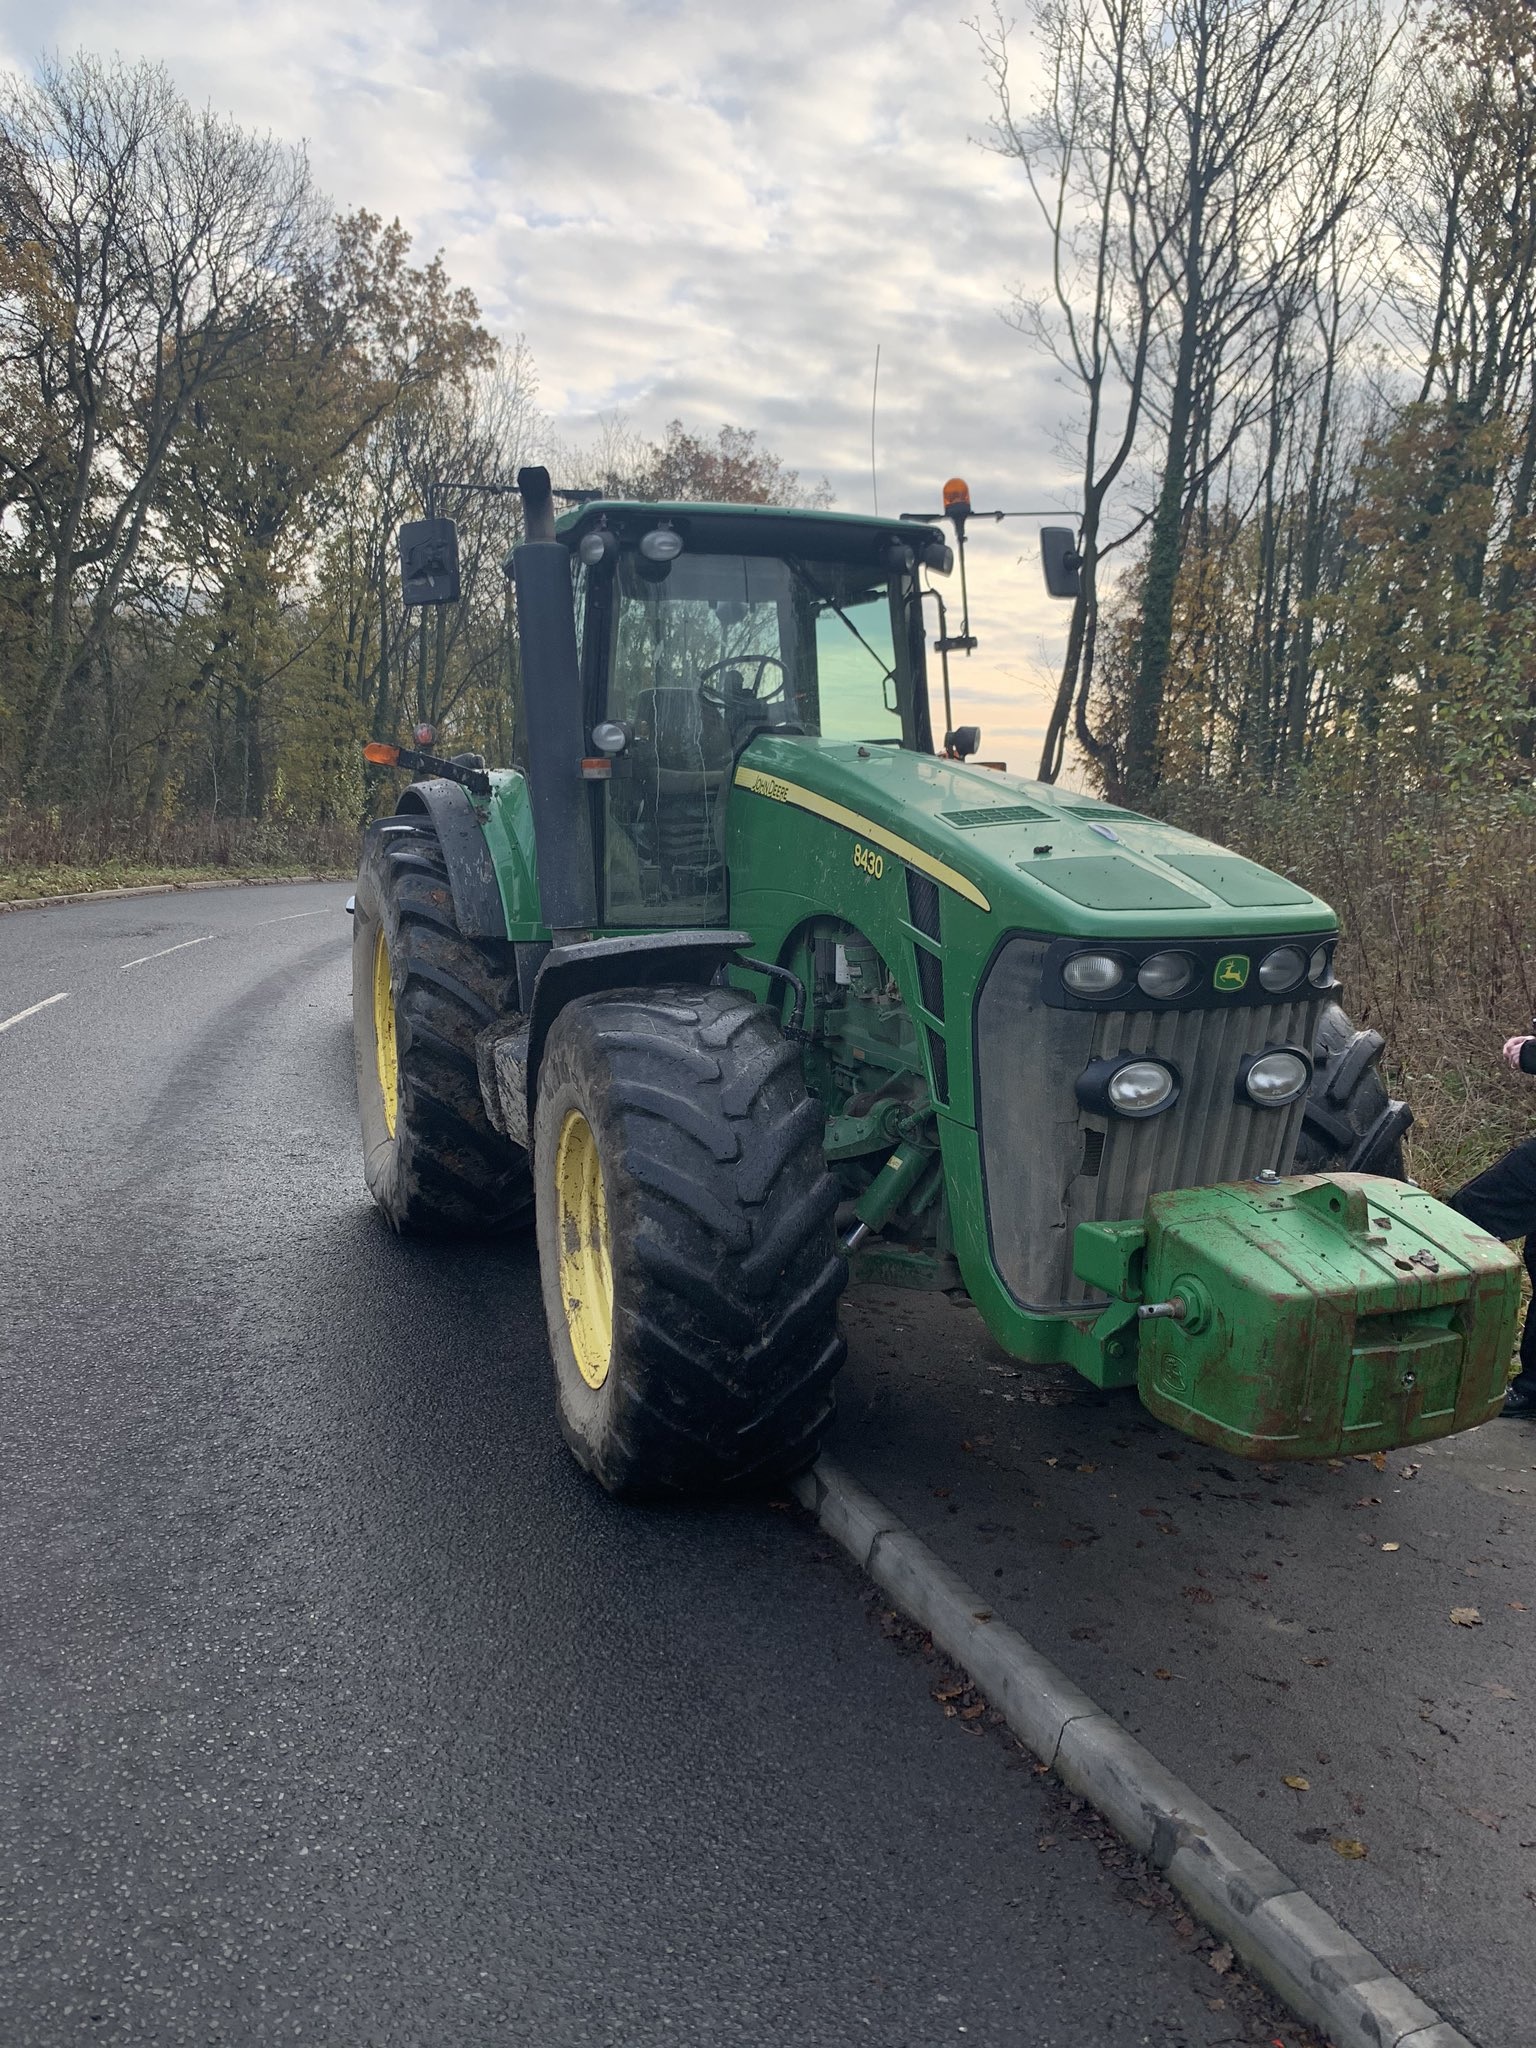 Stolen tractor worth £85,000 recovered by police in 24 hours